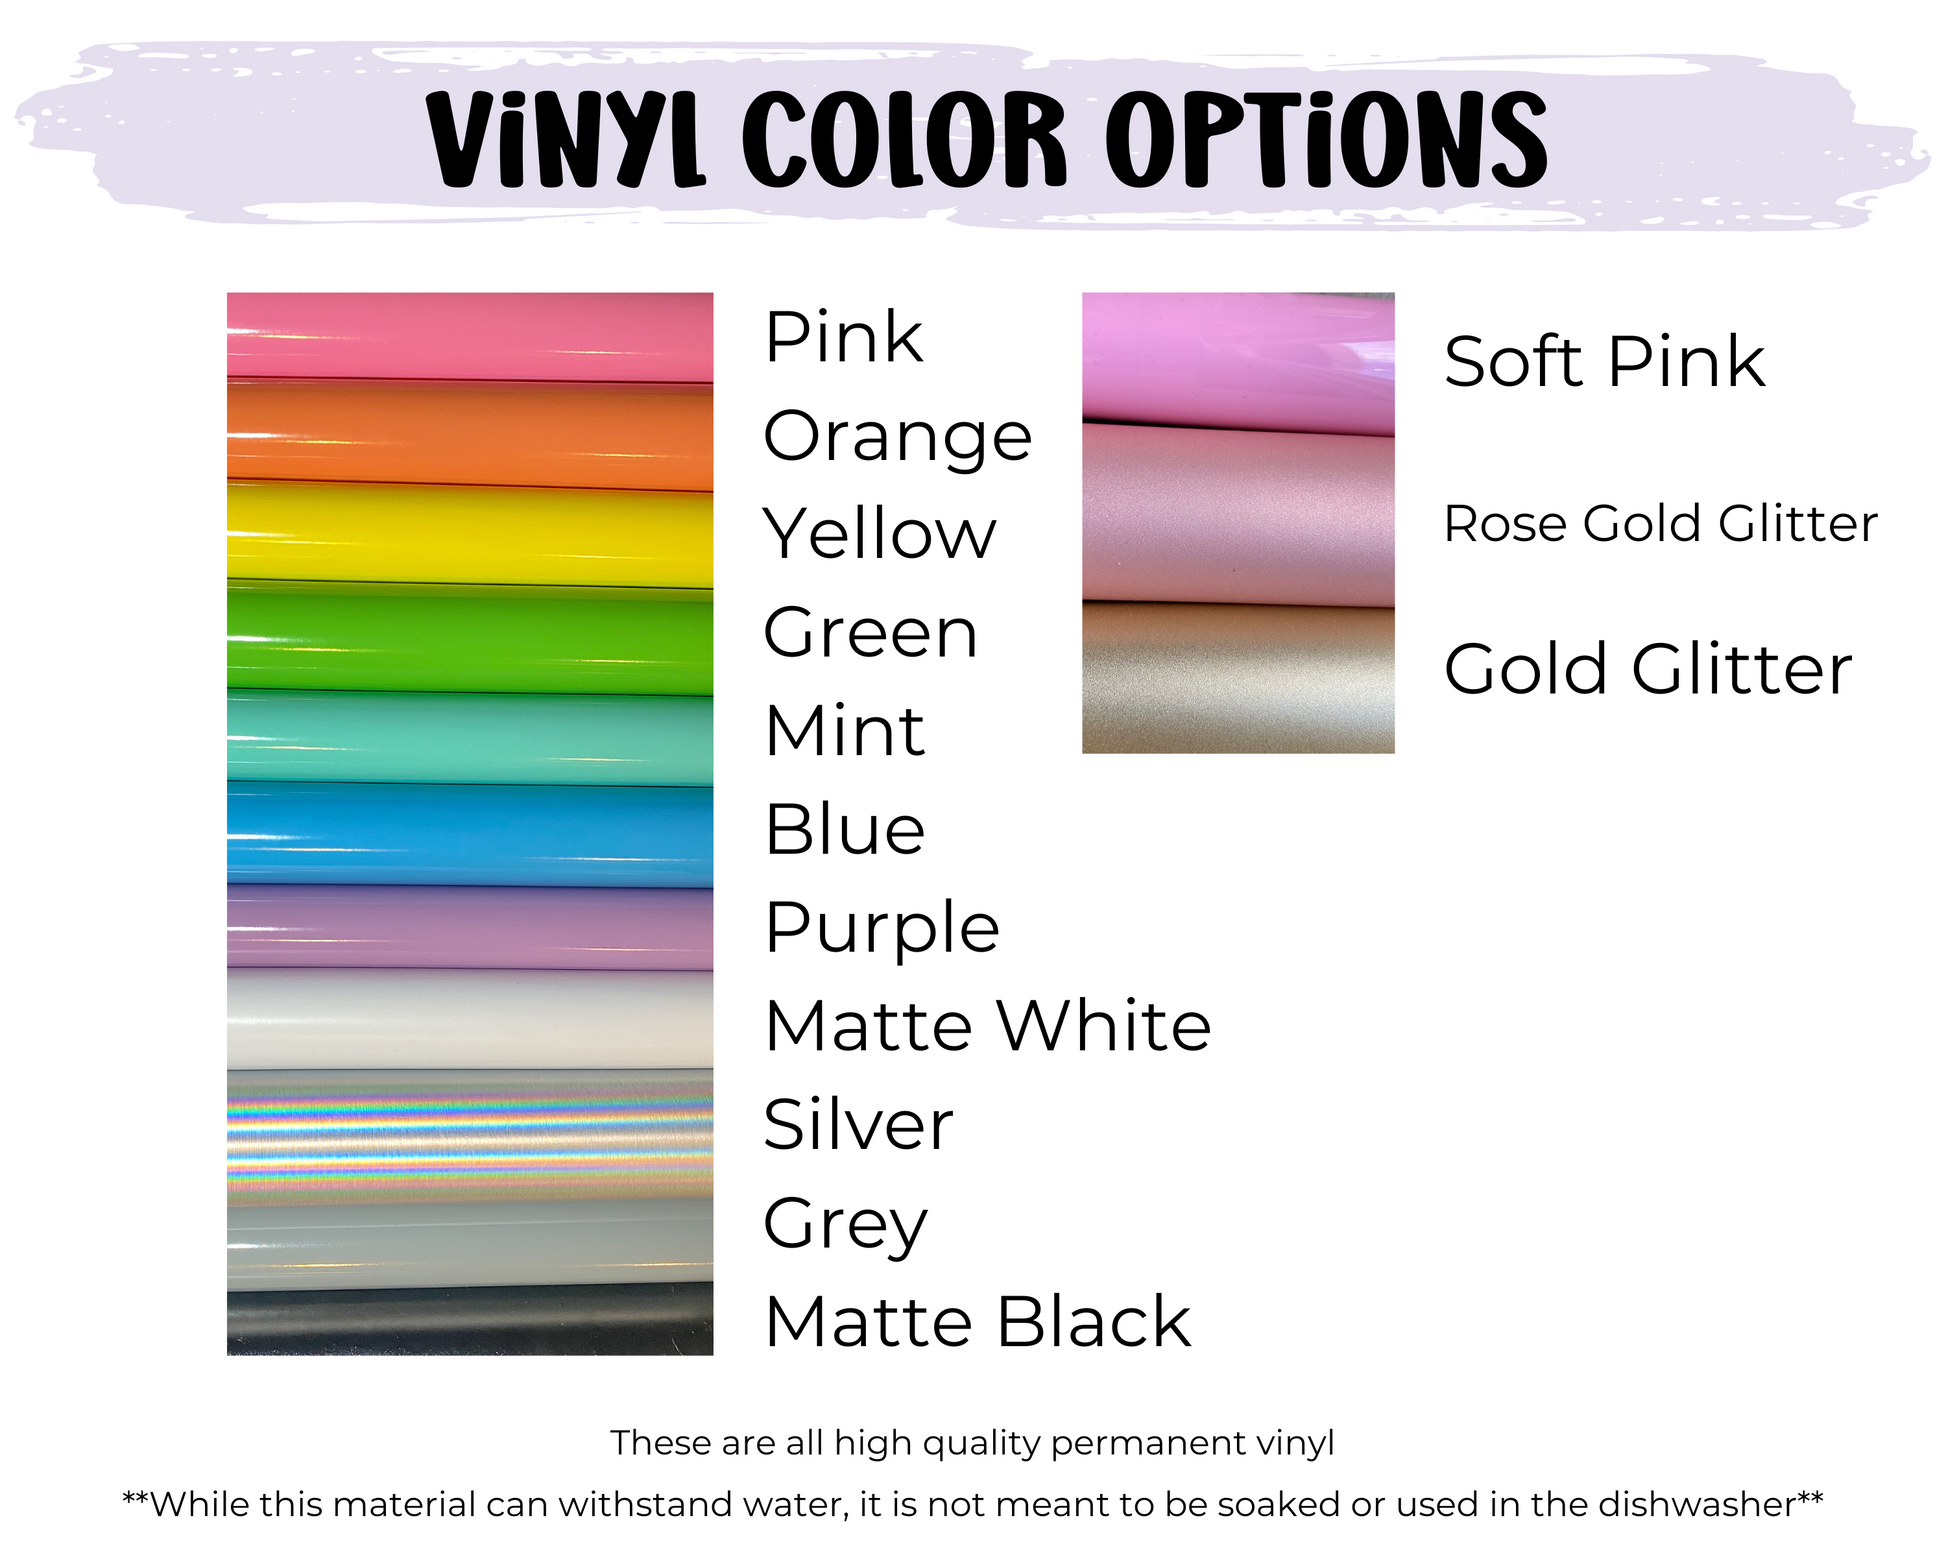 shows all the vinyl color options, pink, orange, yellow, green, mint, blue, purple, matte white, silver, grey, matte black, soft pink, rose gold glitter, and gold glitter